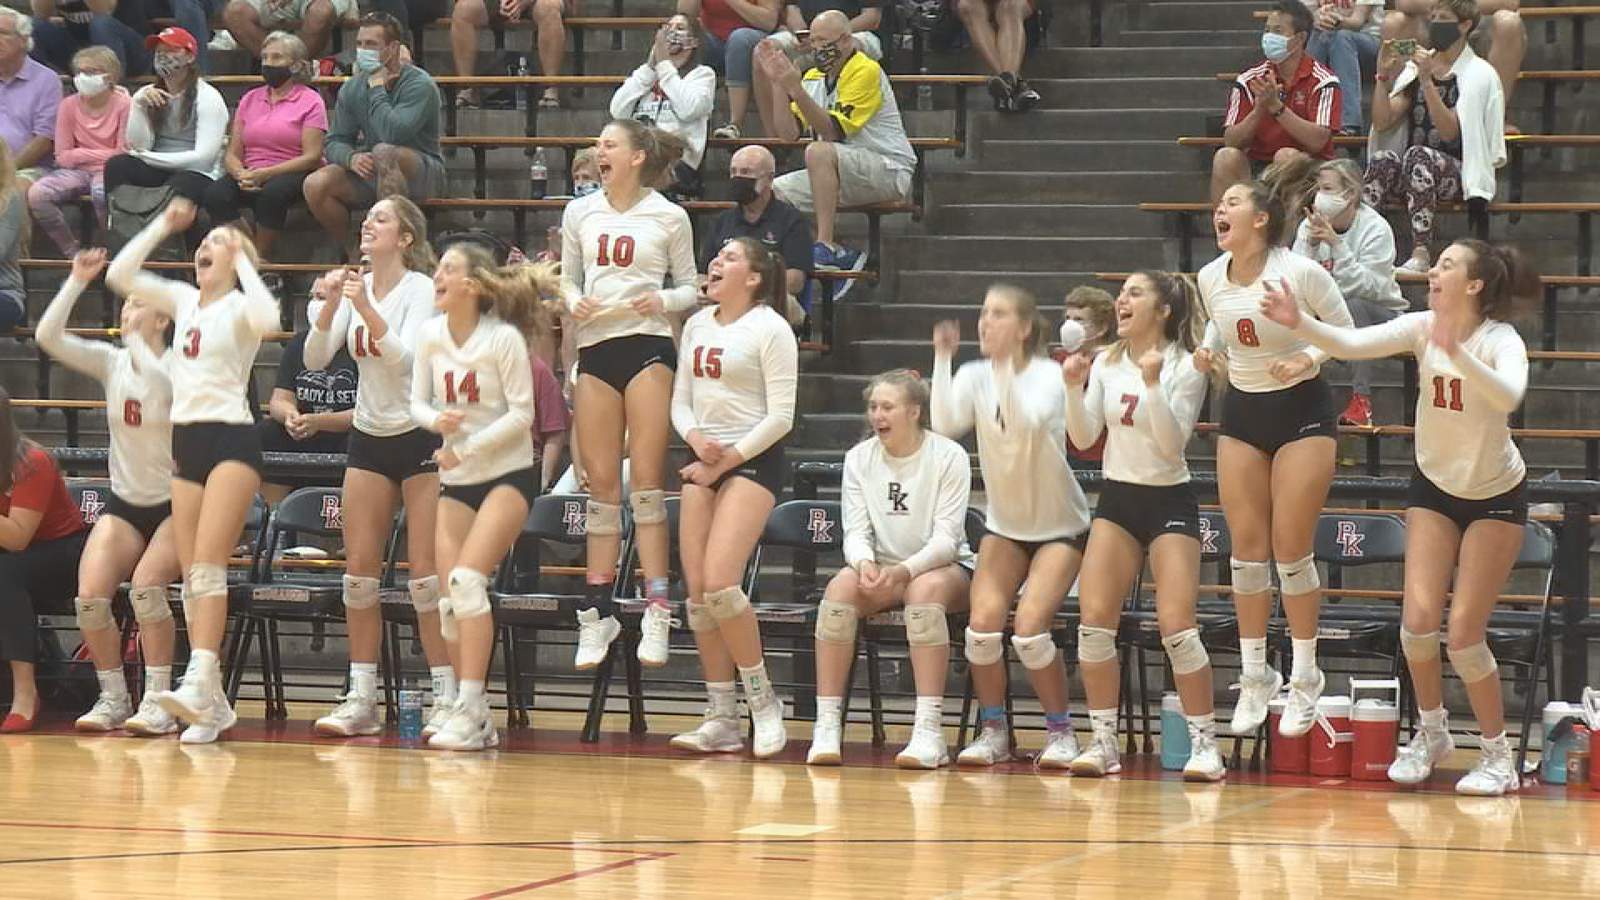 High school volleyball 2020: Bishop Kenny, Ponte Vedra headed to state semis